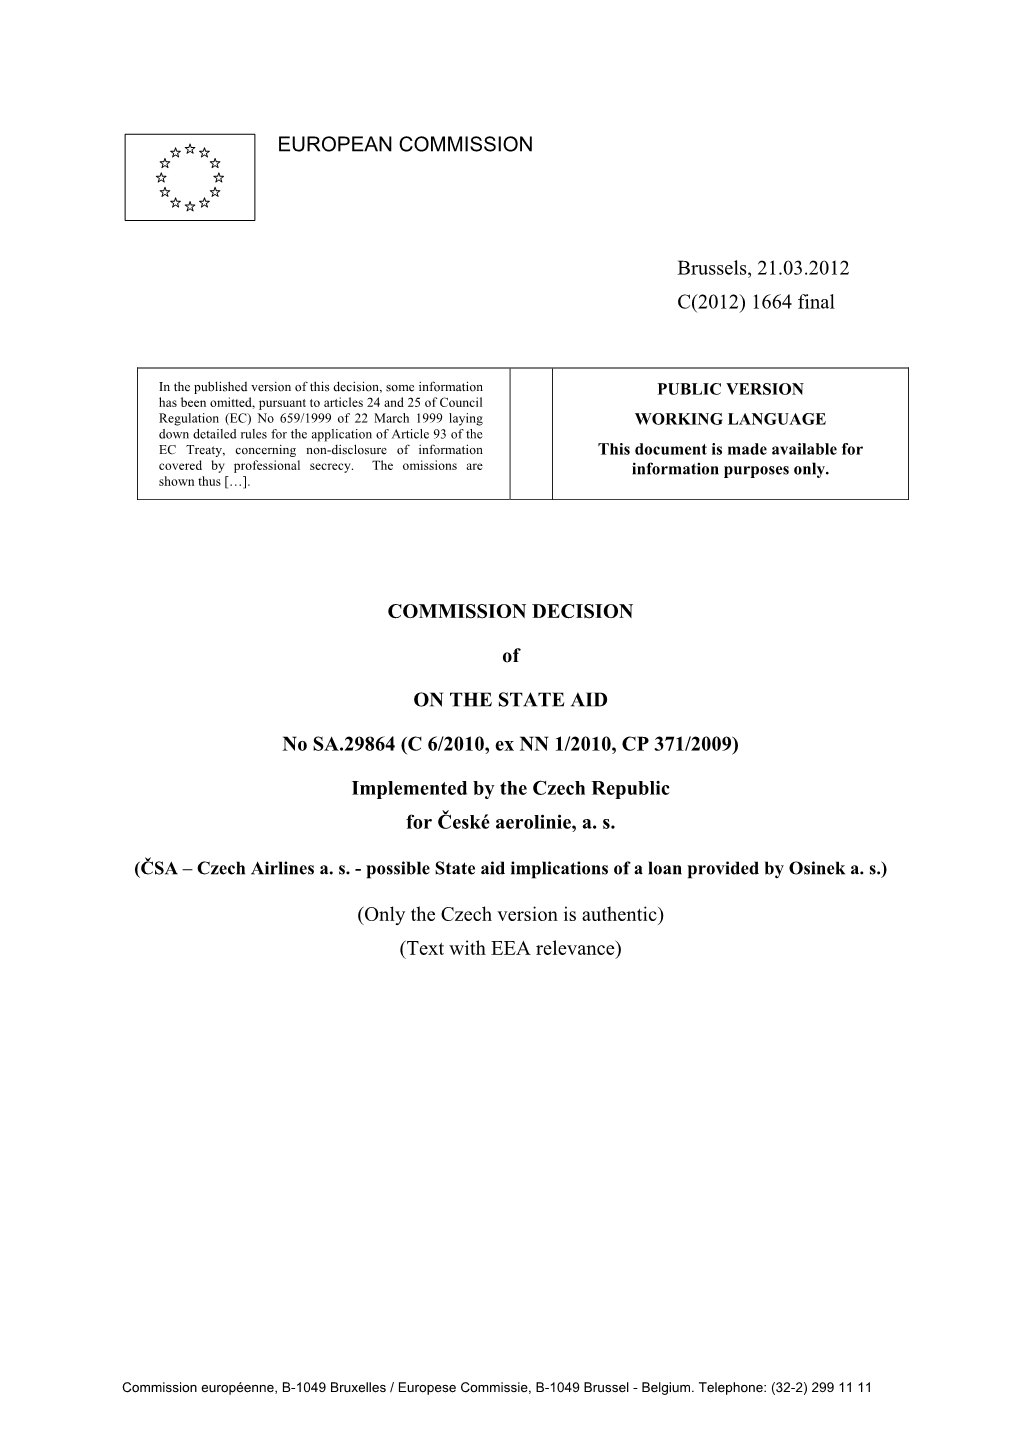 1664 Final COMMISSION DECISION of on the STATE AID No SA